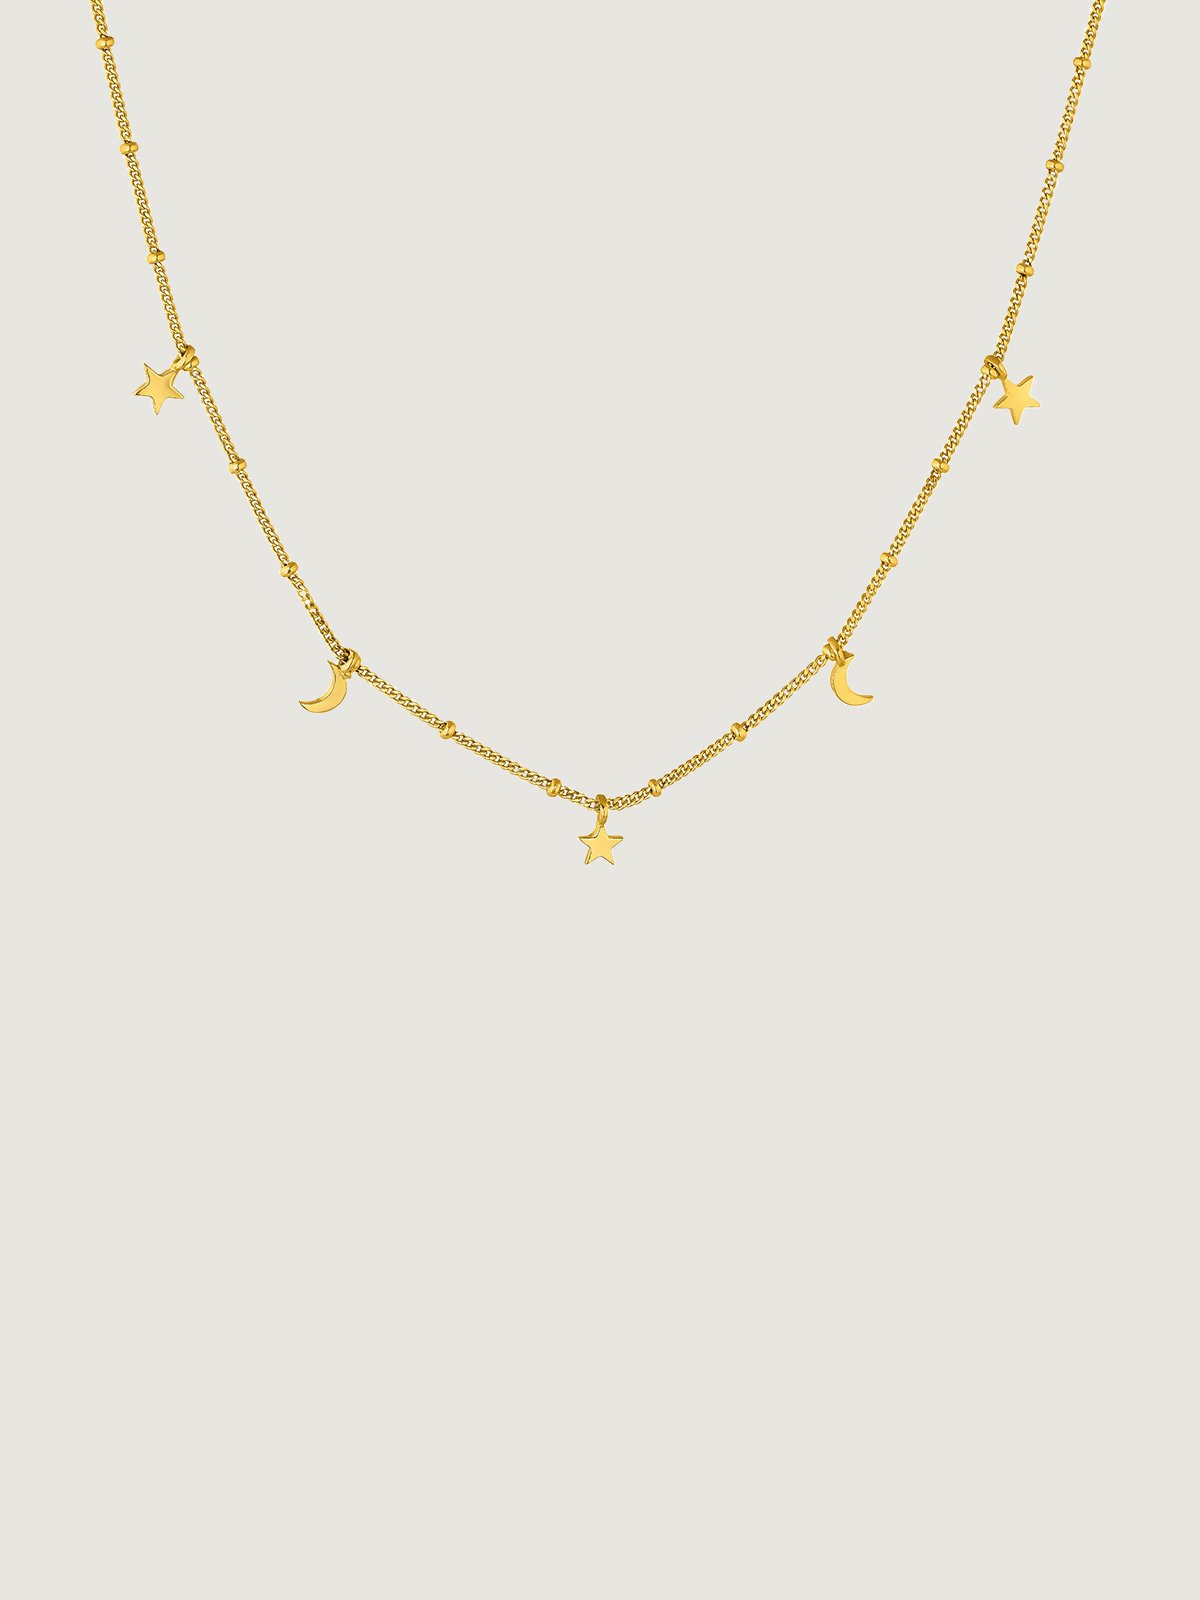 925 Silver necklace coated in 18K yellow gold with stars and moons.